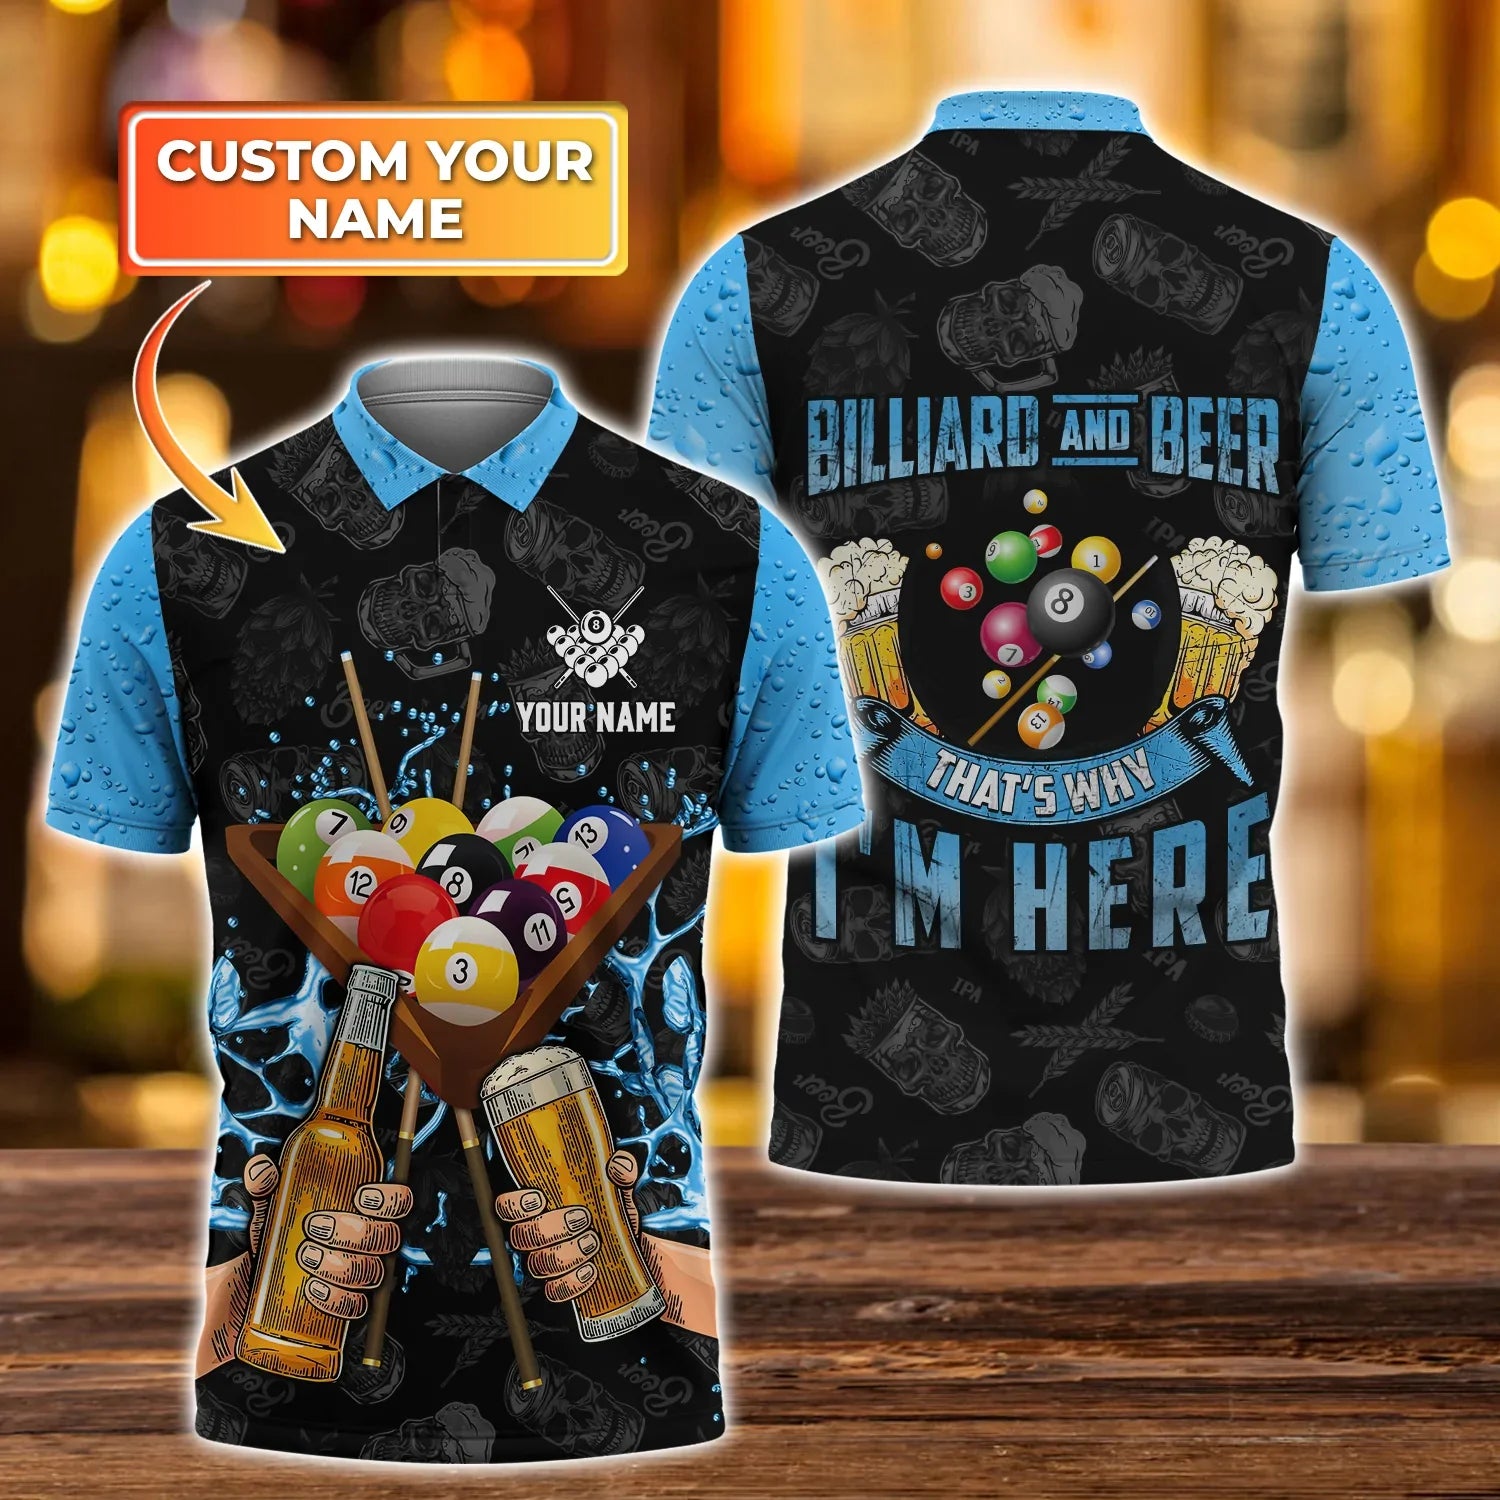 Personalized Name Blue Billiard and Beer Polo Shirt/ 3D Over Print Billiard Shirts For Men/ Team